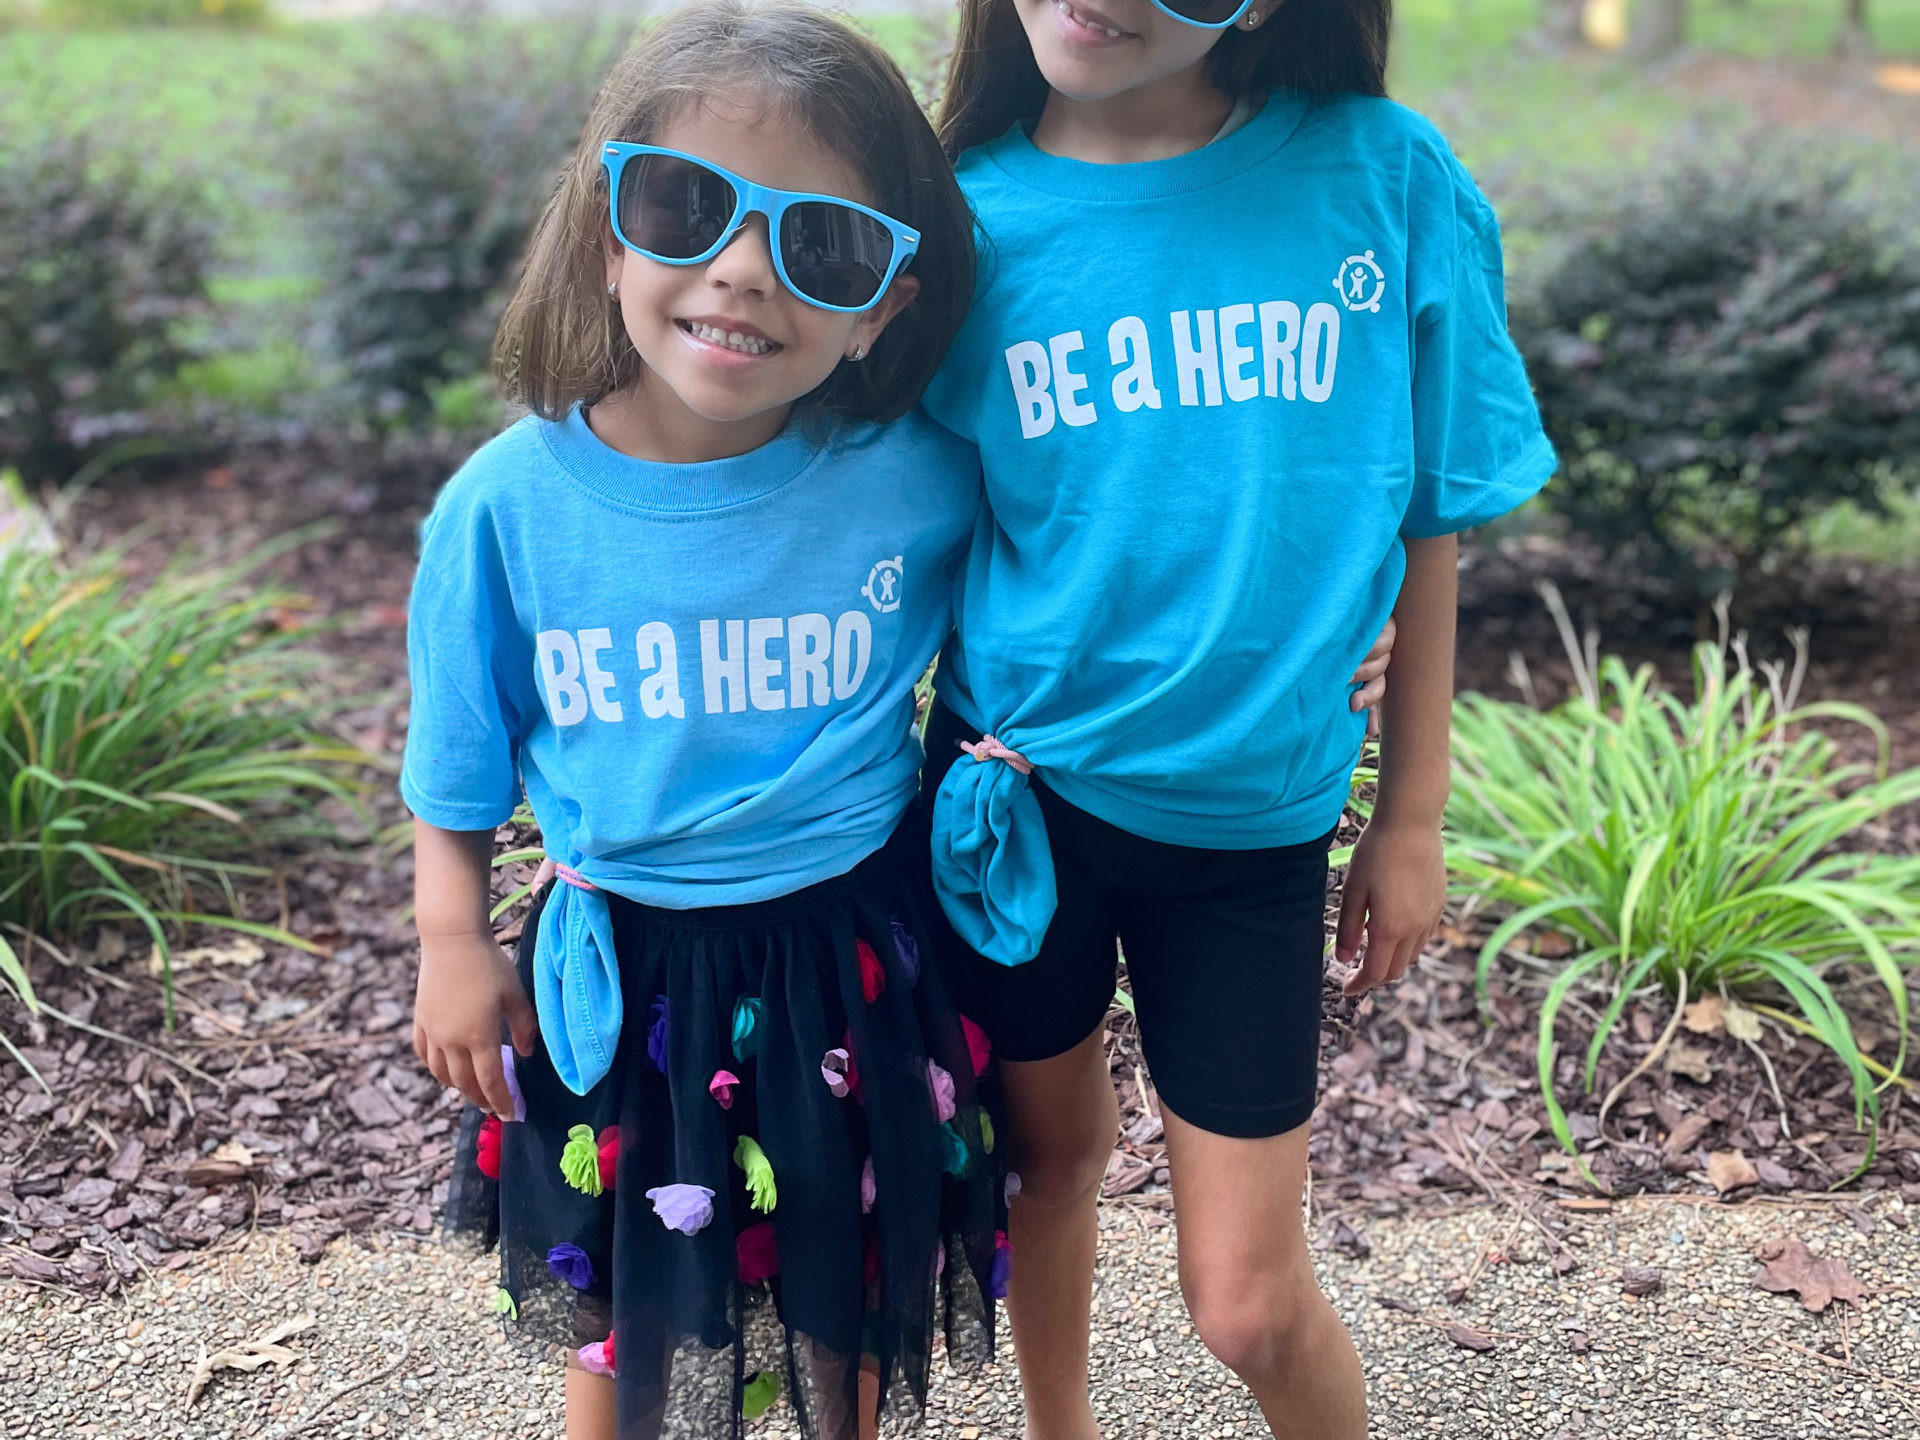 Two children standing together wearing bright blue shirts reading Be A Hero